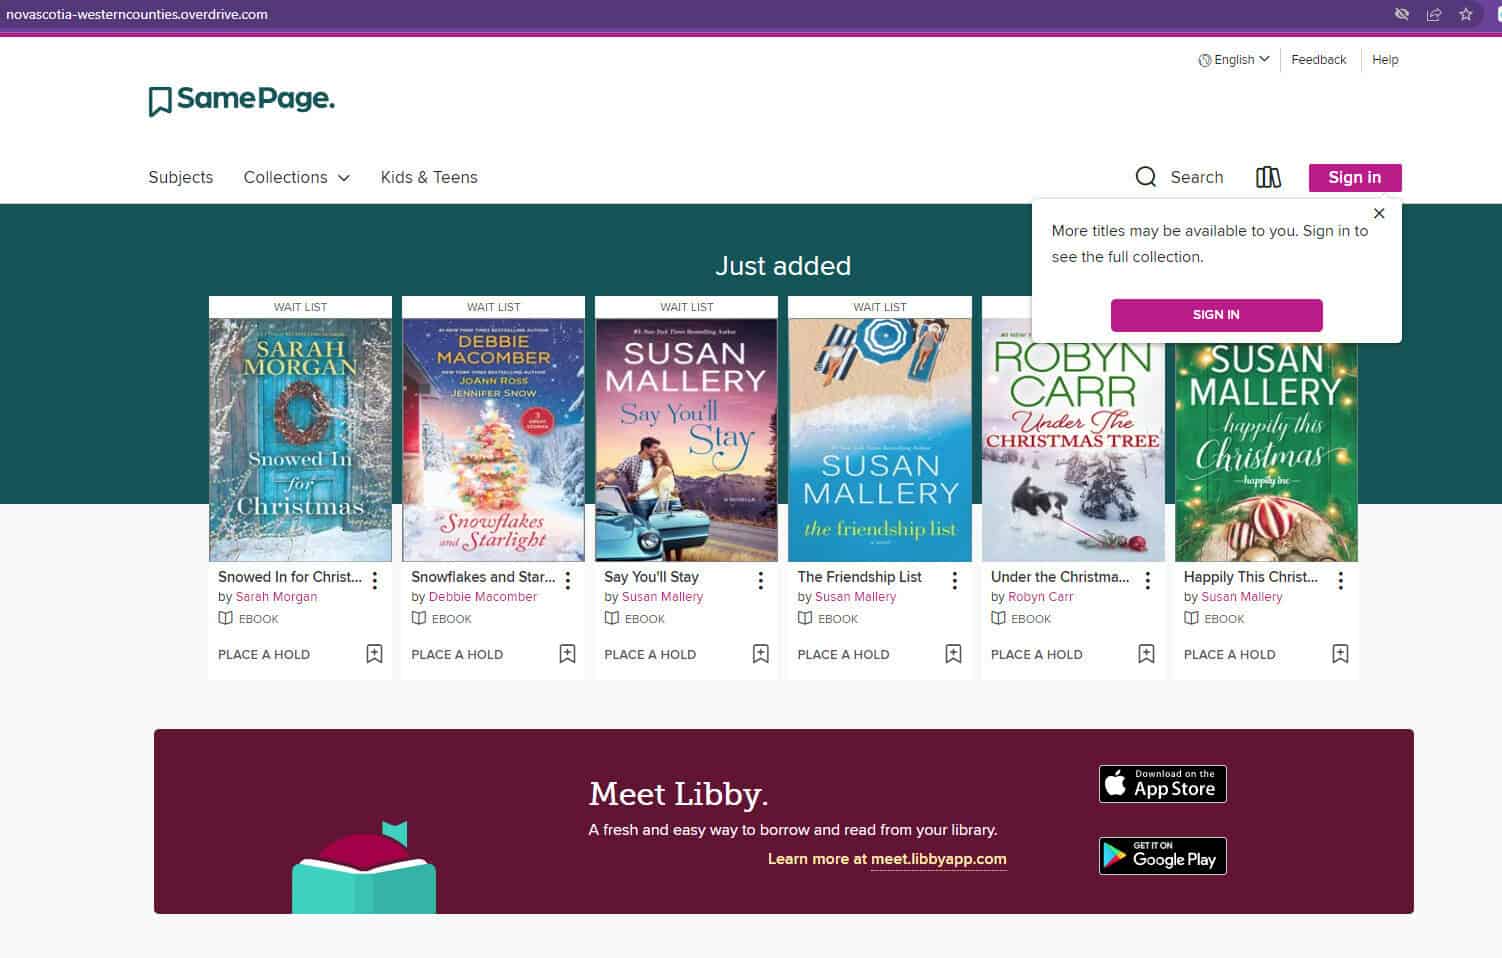 image of library's OverDrive digital service website